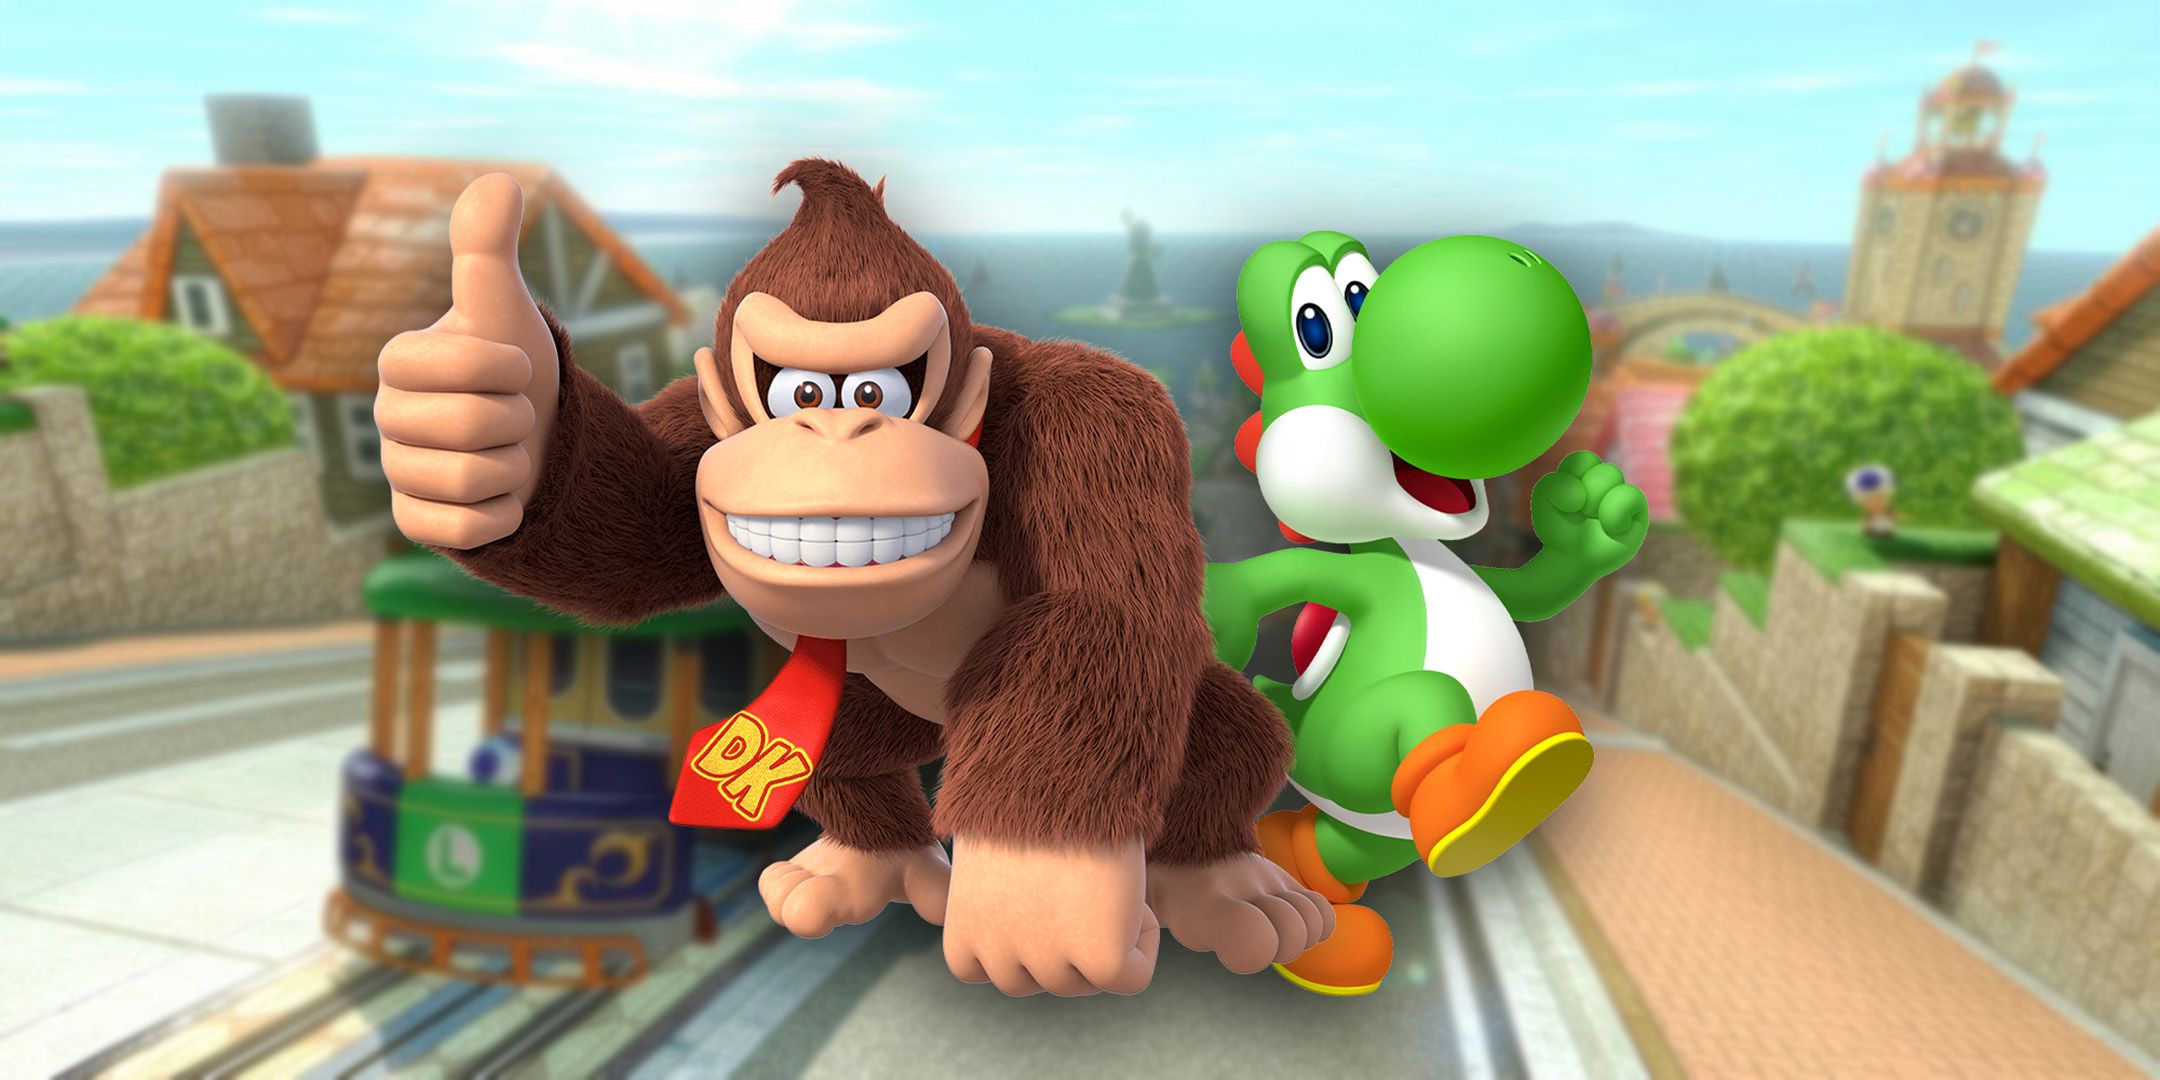 Donkey Kong and Yoshi in Toad Harbor from Mario Kart 8